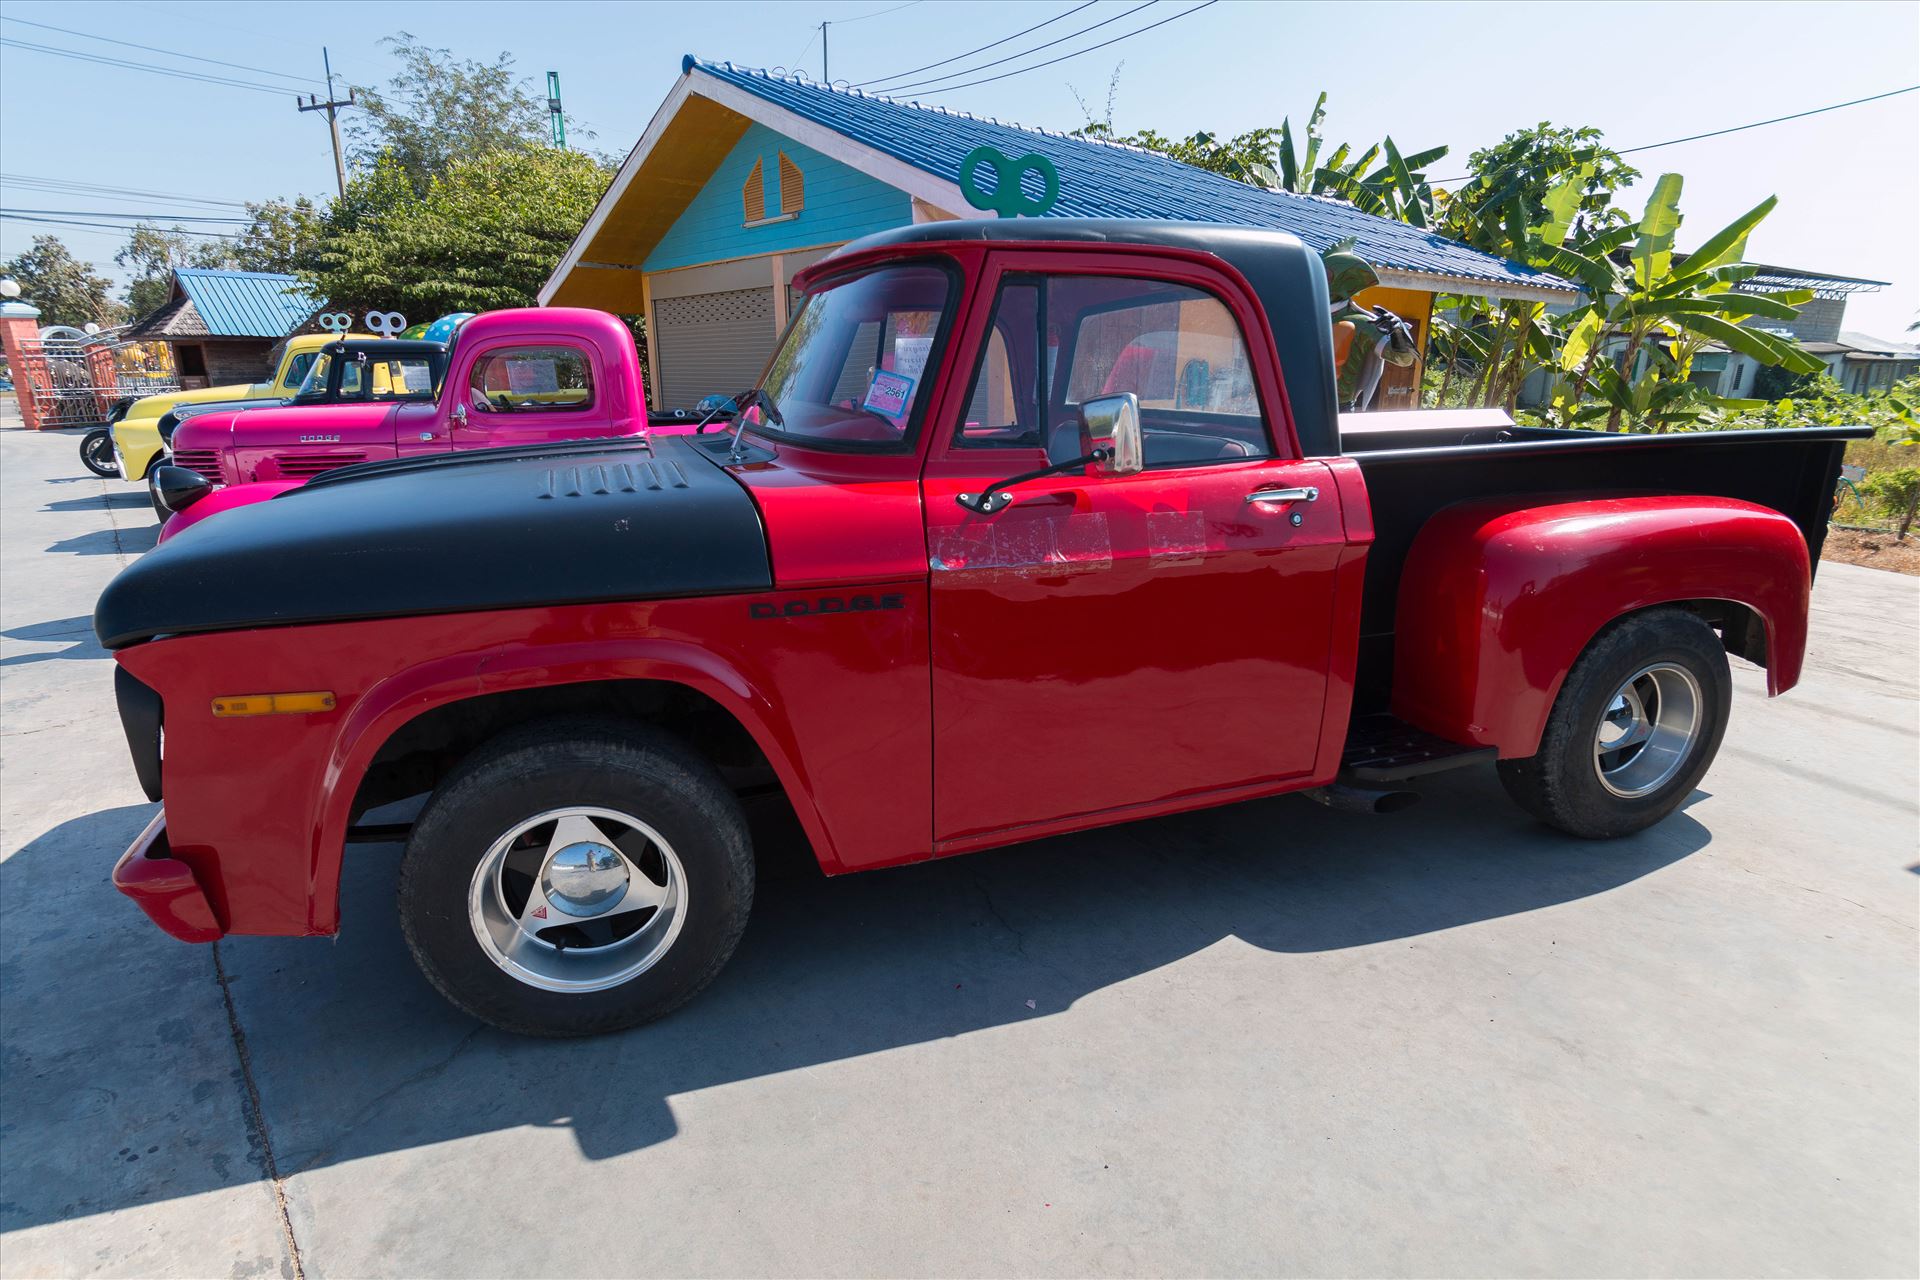 1967 vintage dodge pickup truck  by AnnetteJohnsonPhotography